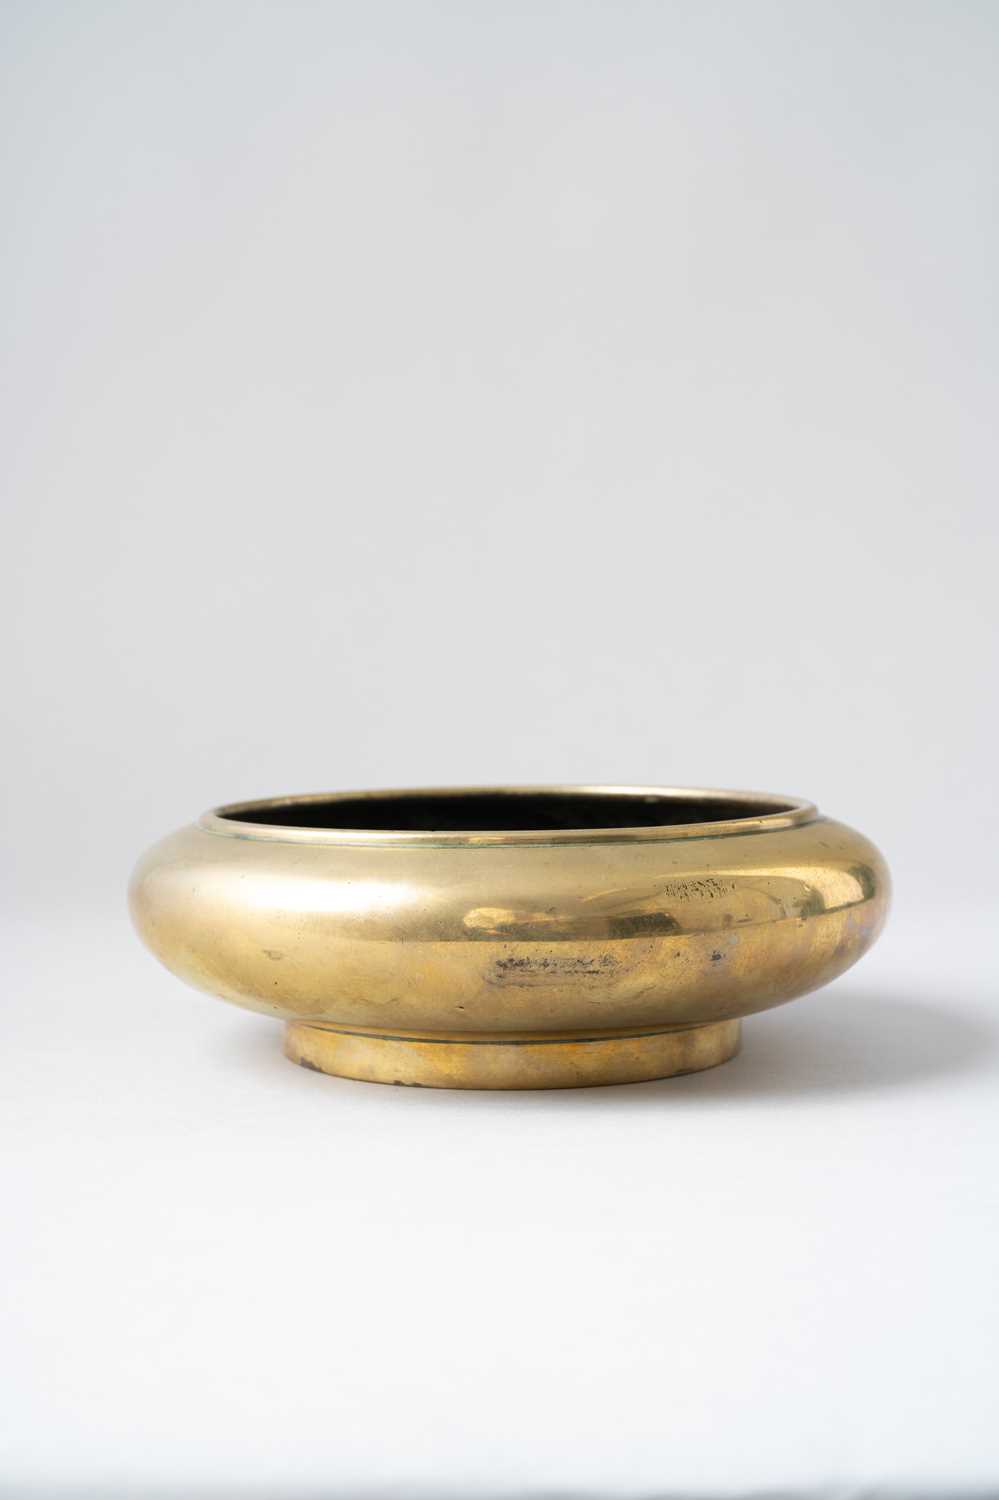 A CHINESE BRONZE INCENSE BURNER QING DYNASTY With a compressed circular body and a raised rim,